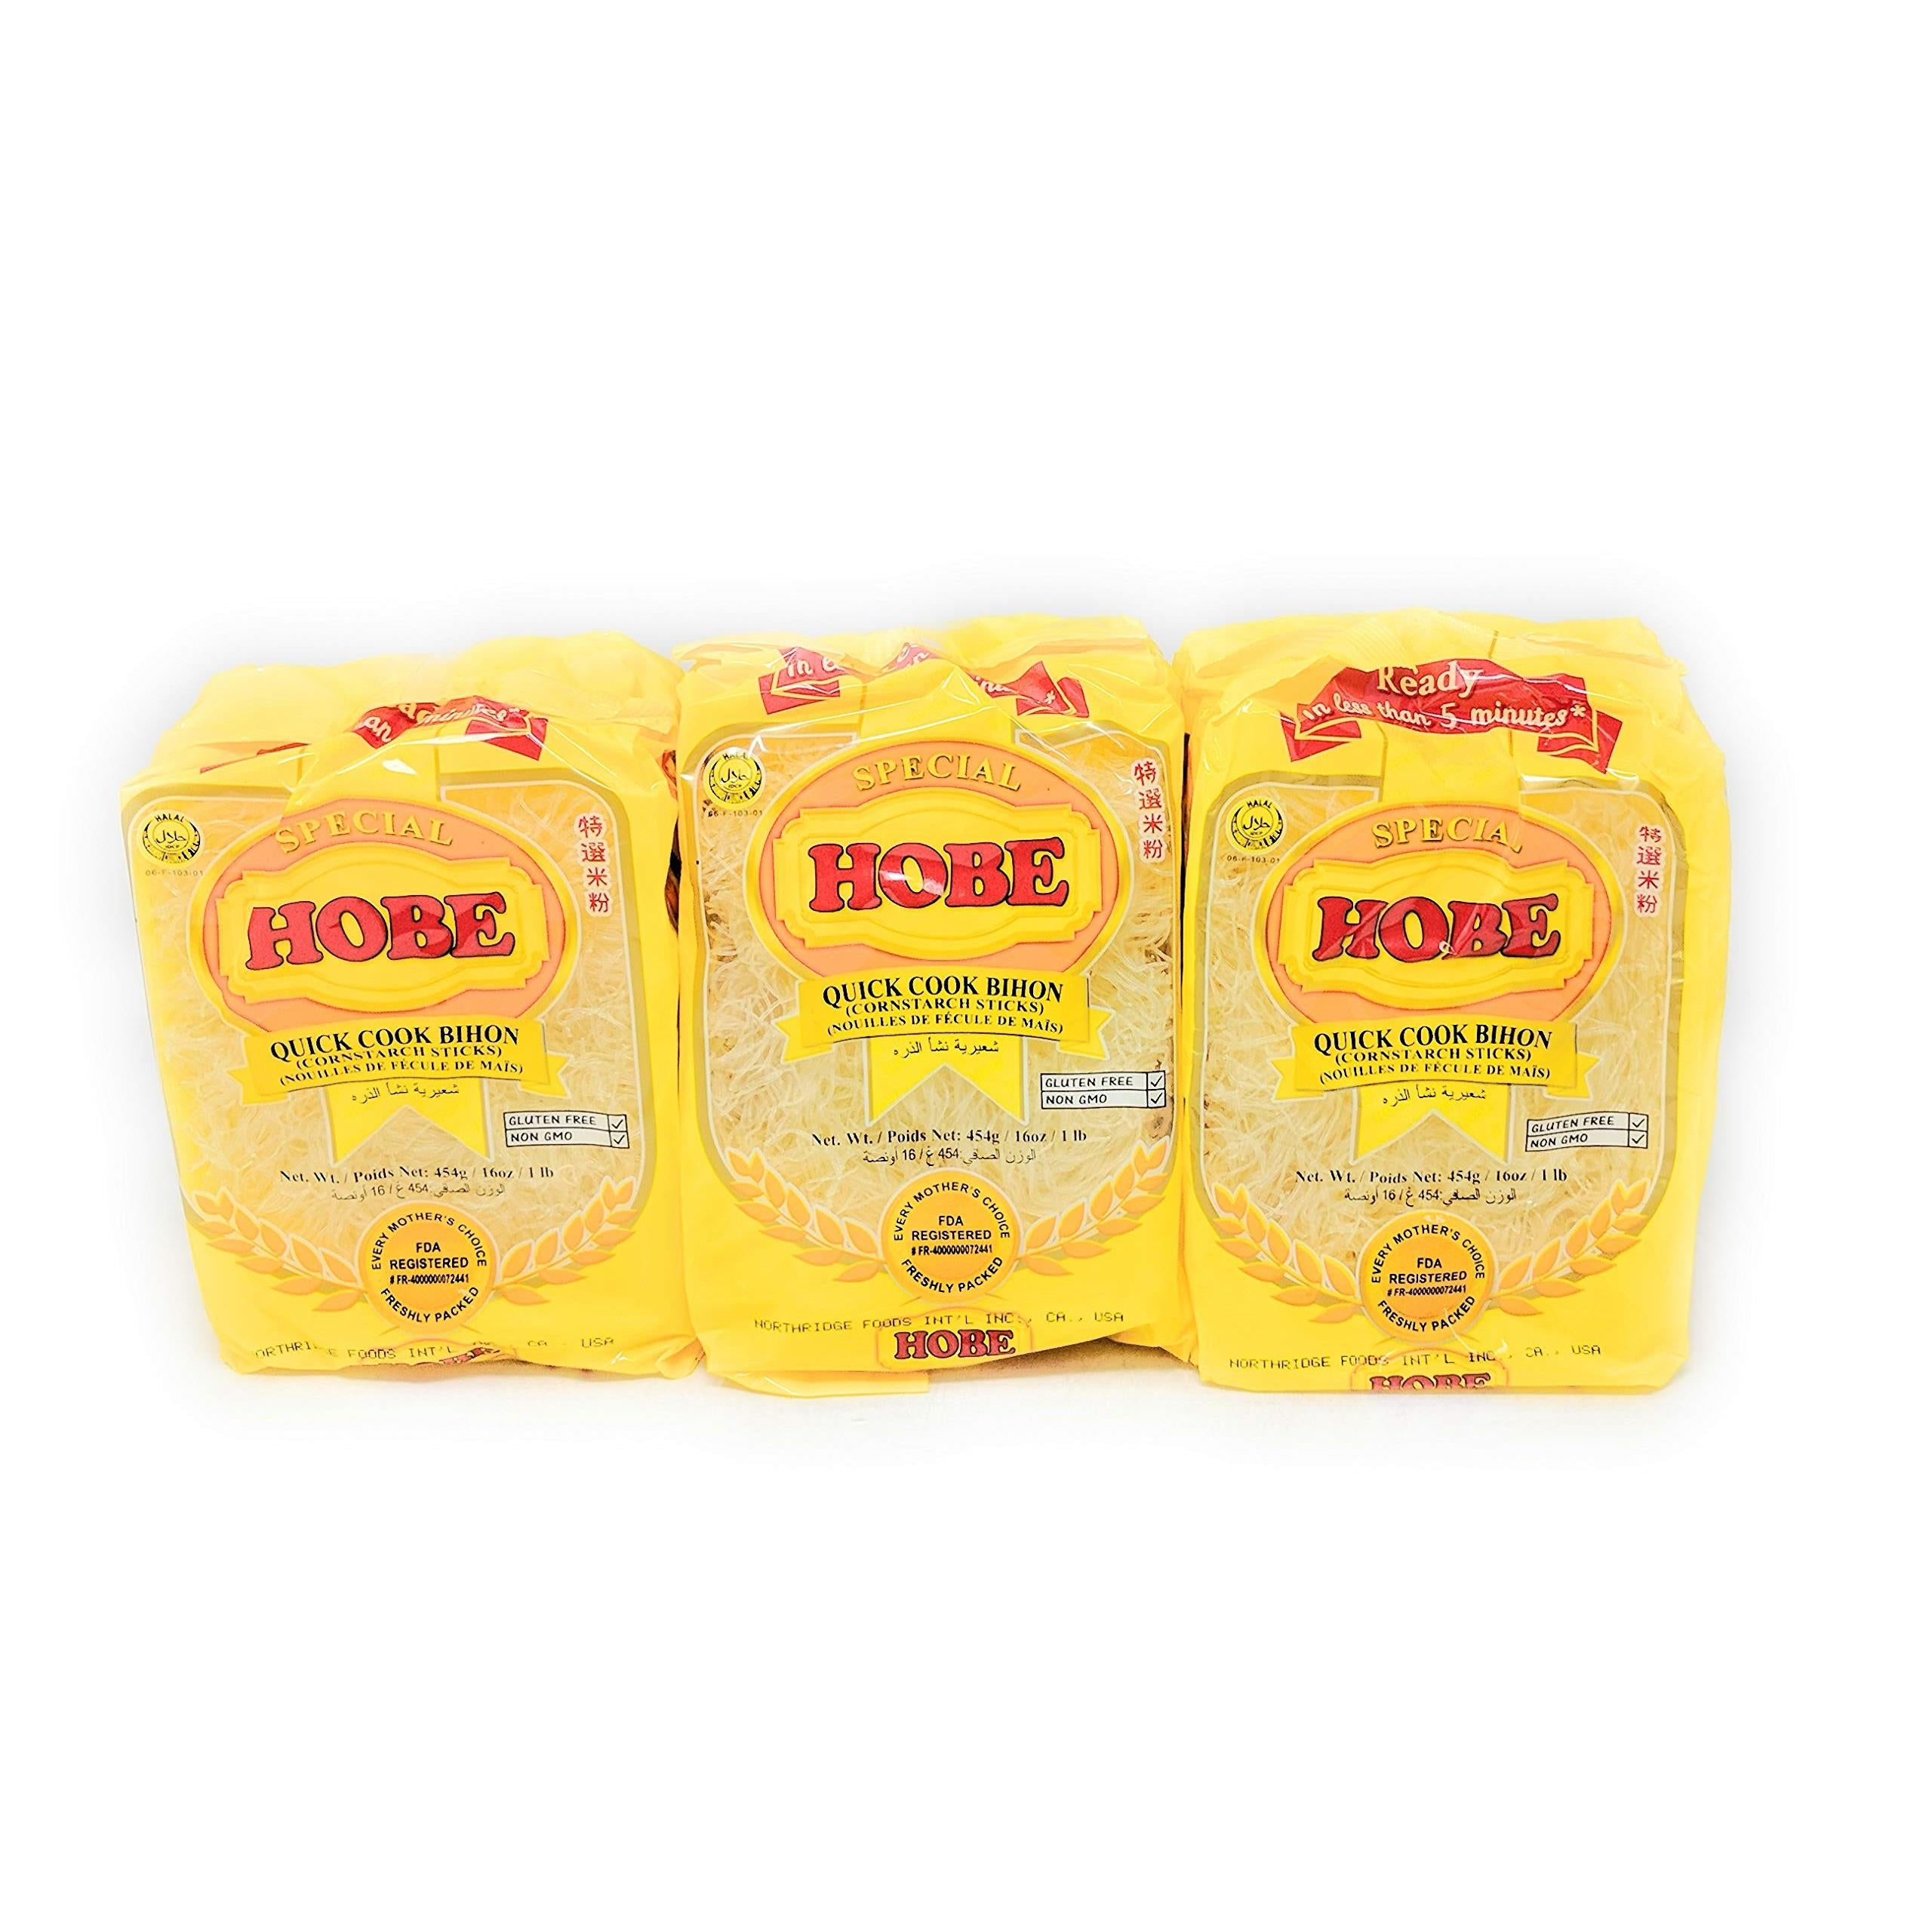 Hobe Special Golden Bihon Pack of Three 454g or 1 Lb a Pack